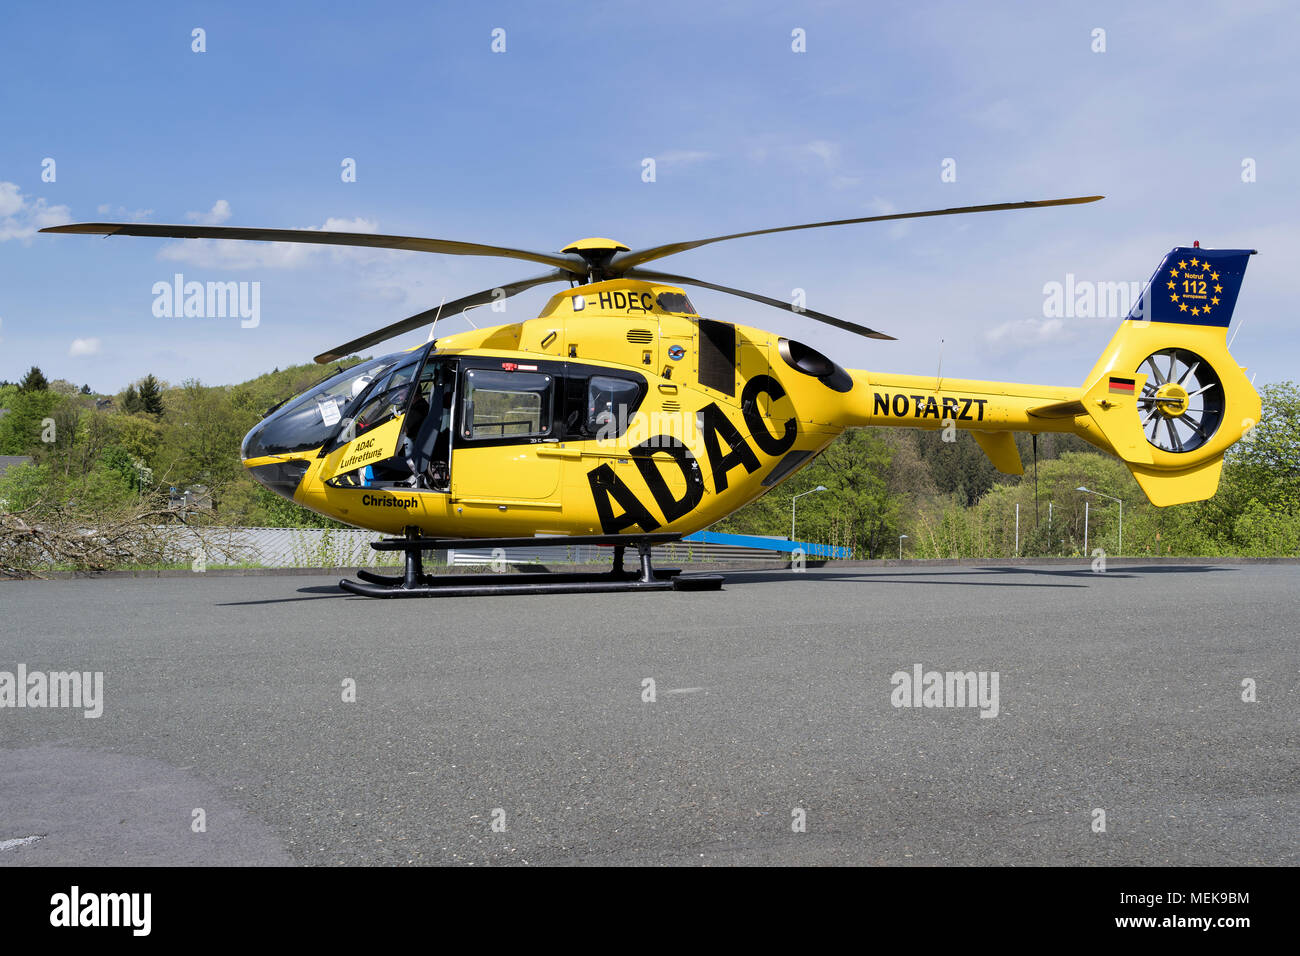 ADAC Luftrettung rescue helicopter D-HDEC of type Eurocopter EC-135 P2. Stock Photo